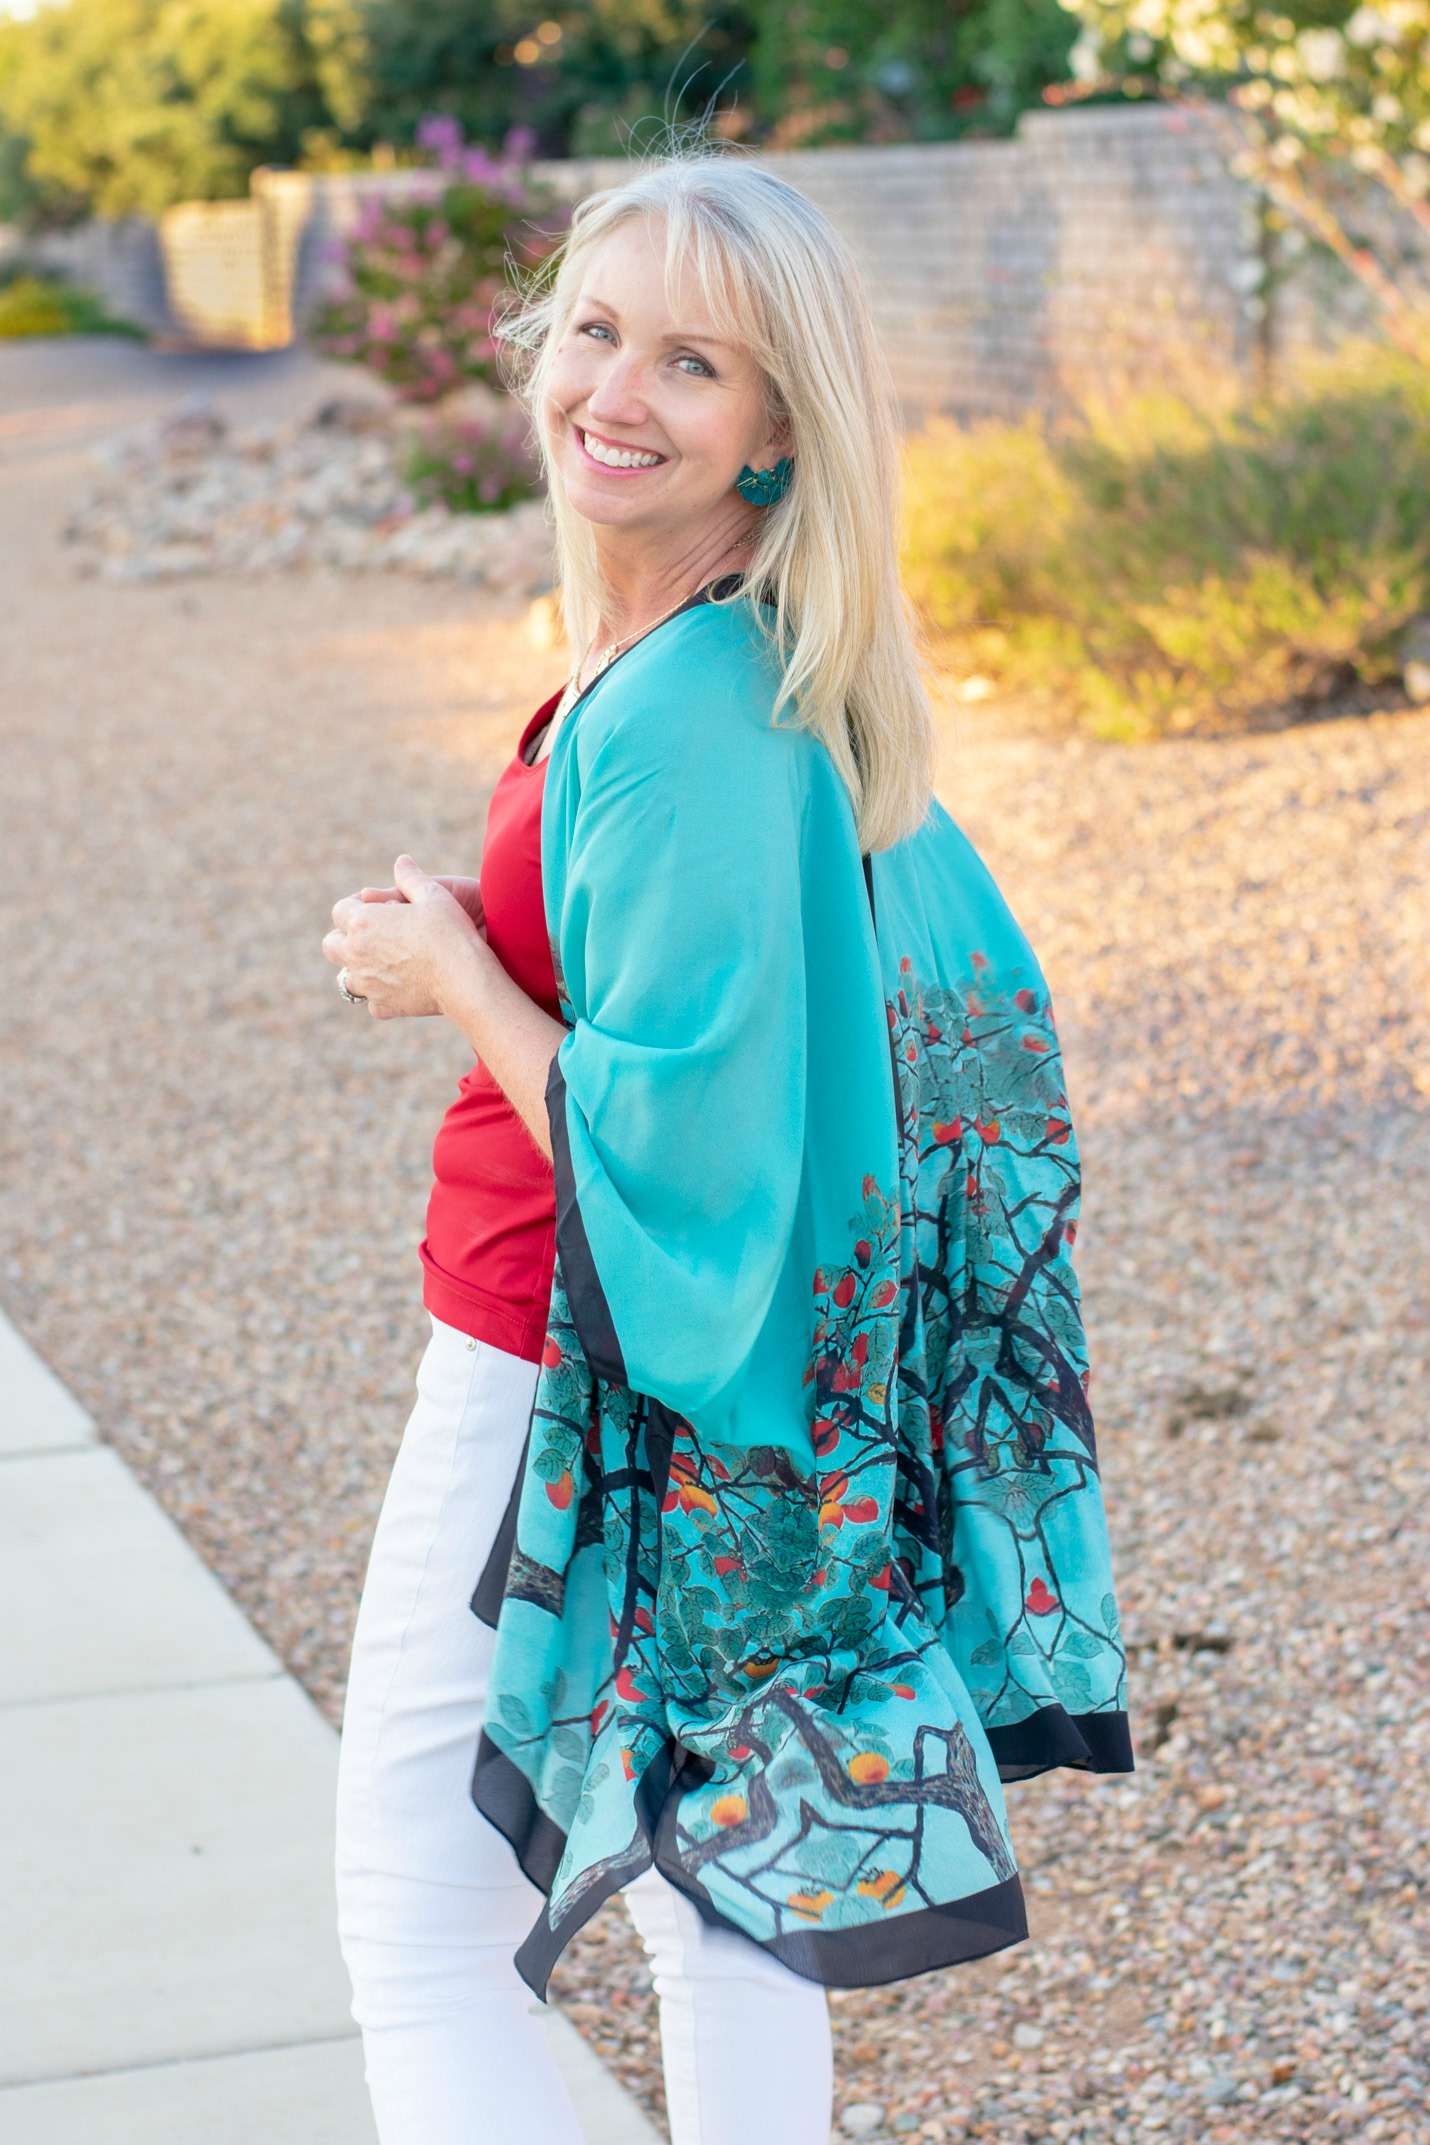 Teal Kimono for a Date Night